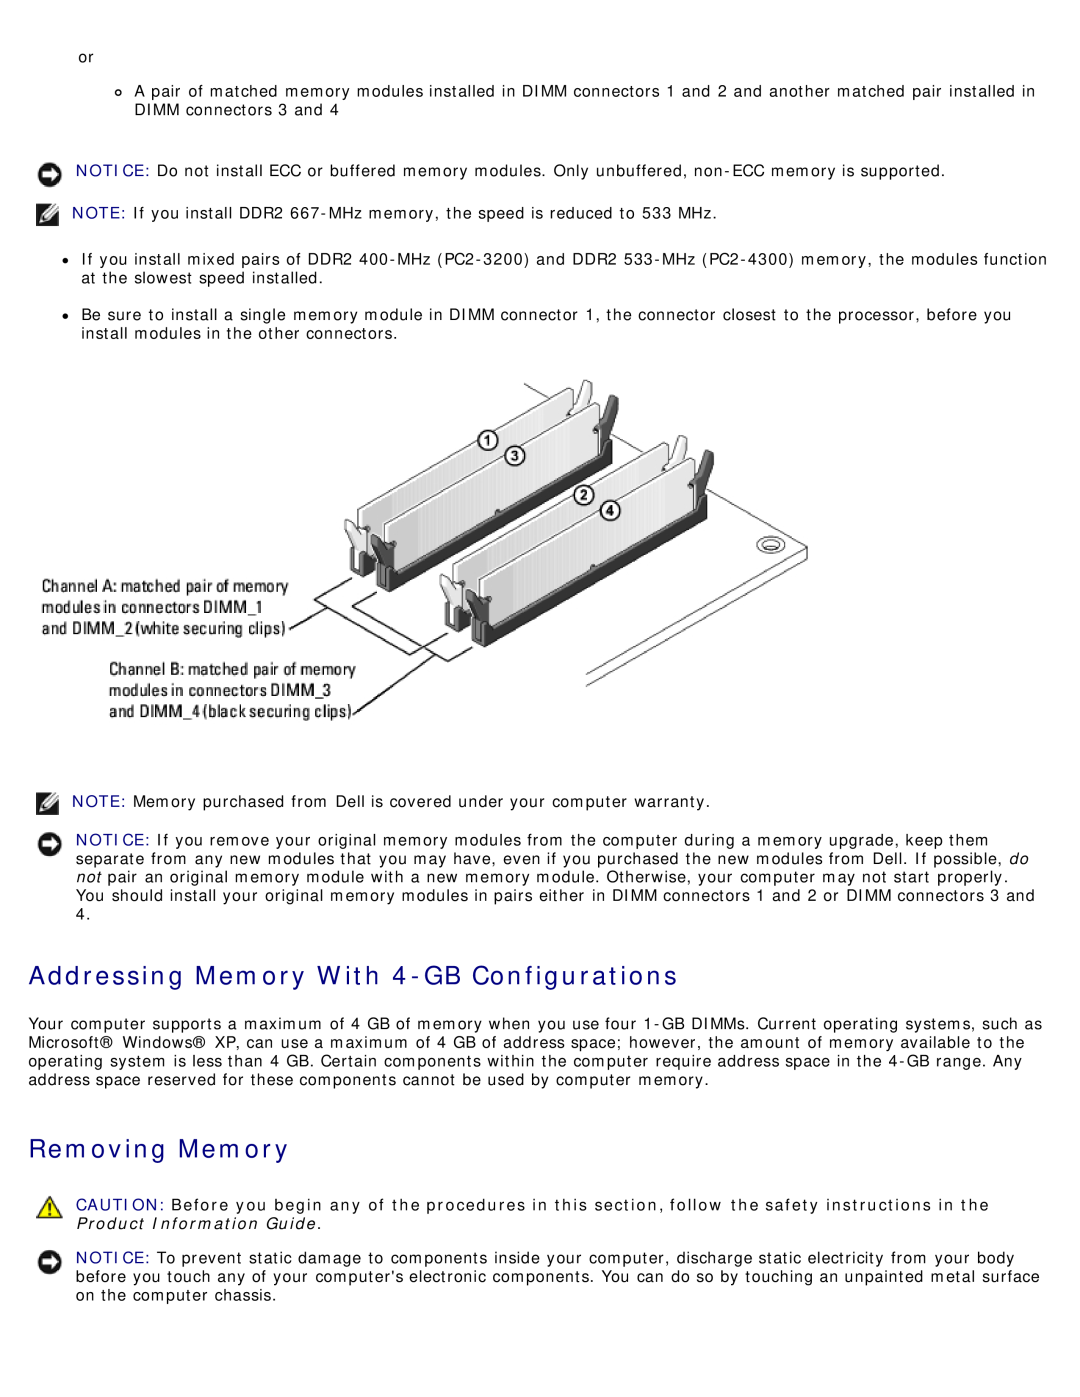 Dell DCSM manual Addressing Memory With 4-GB Configurations, Removing Memory 